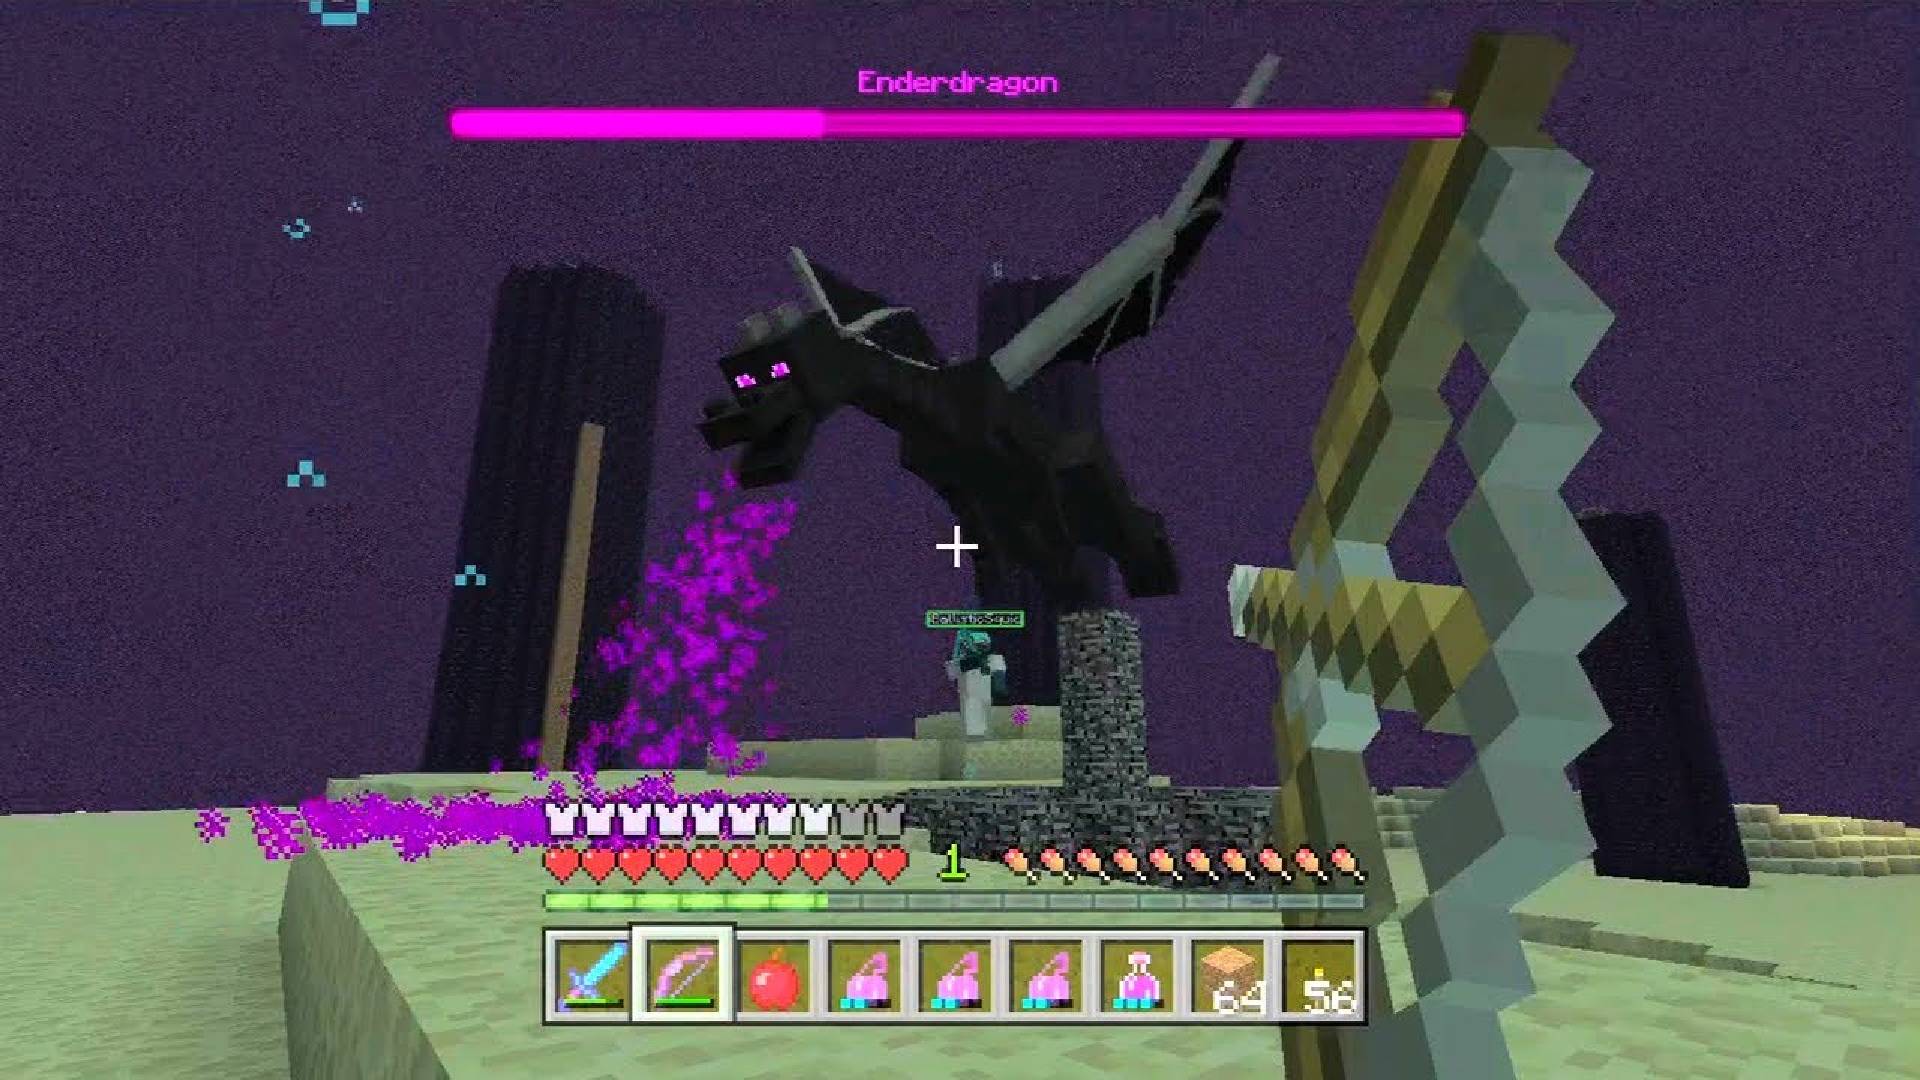 How to find and defeat Ender Dragon in Minecraft